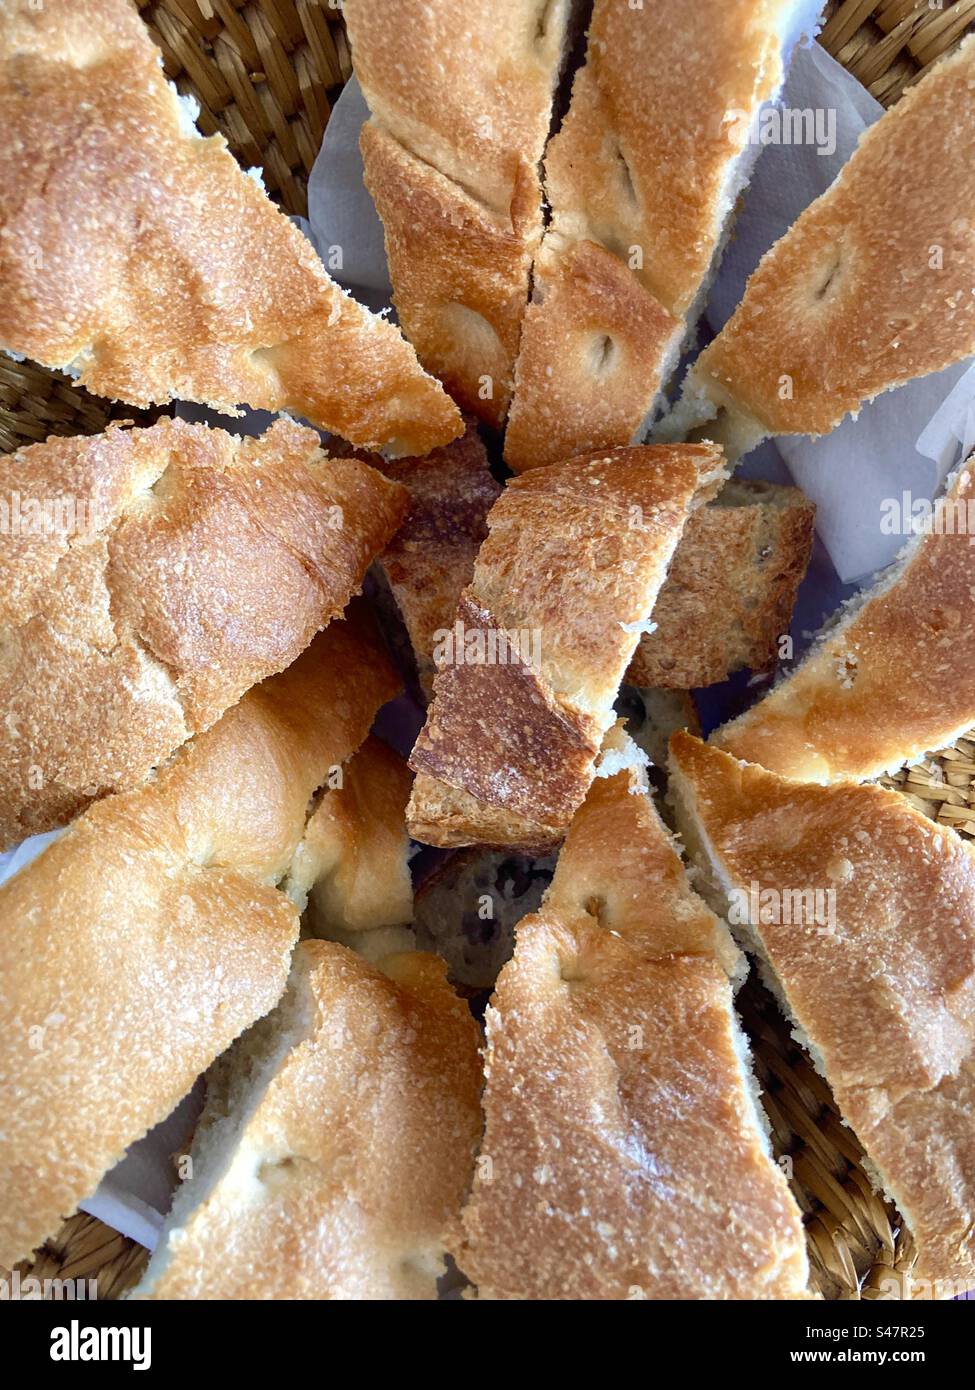 Basket full of cut bread from above Stock Photo